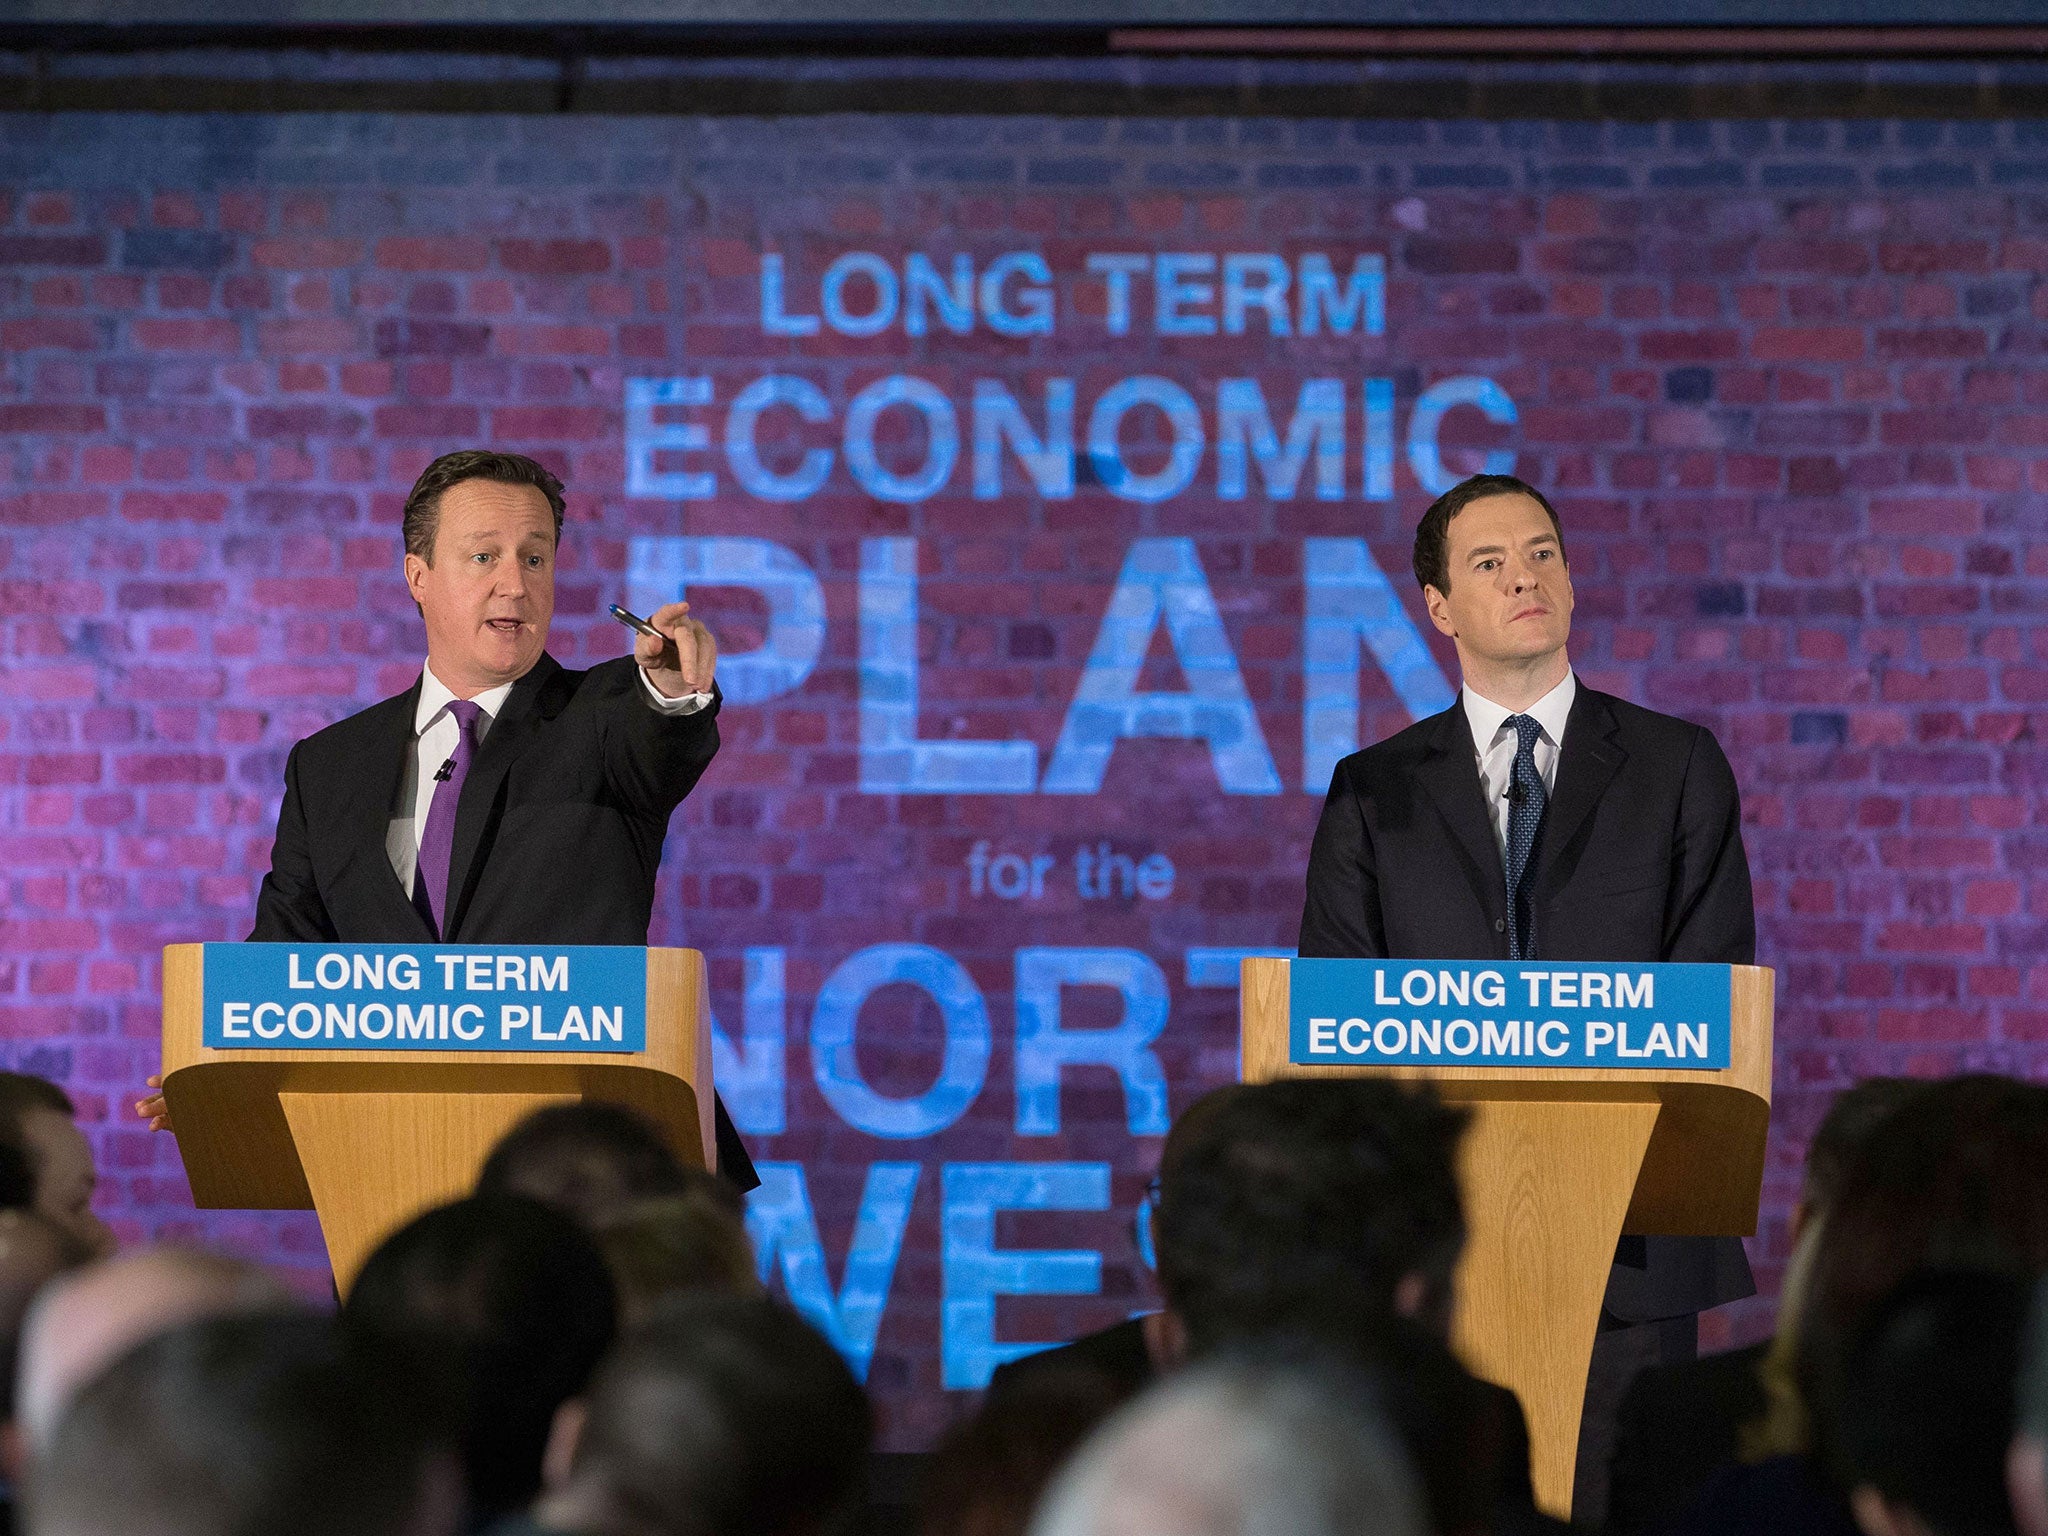 David Cameron and George Osborne said the country was "all in it together" when announcing austerity measures